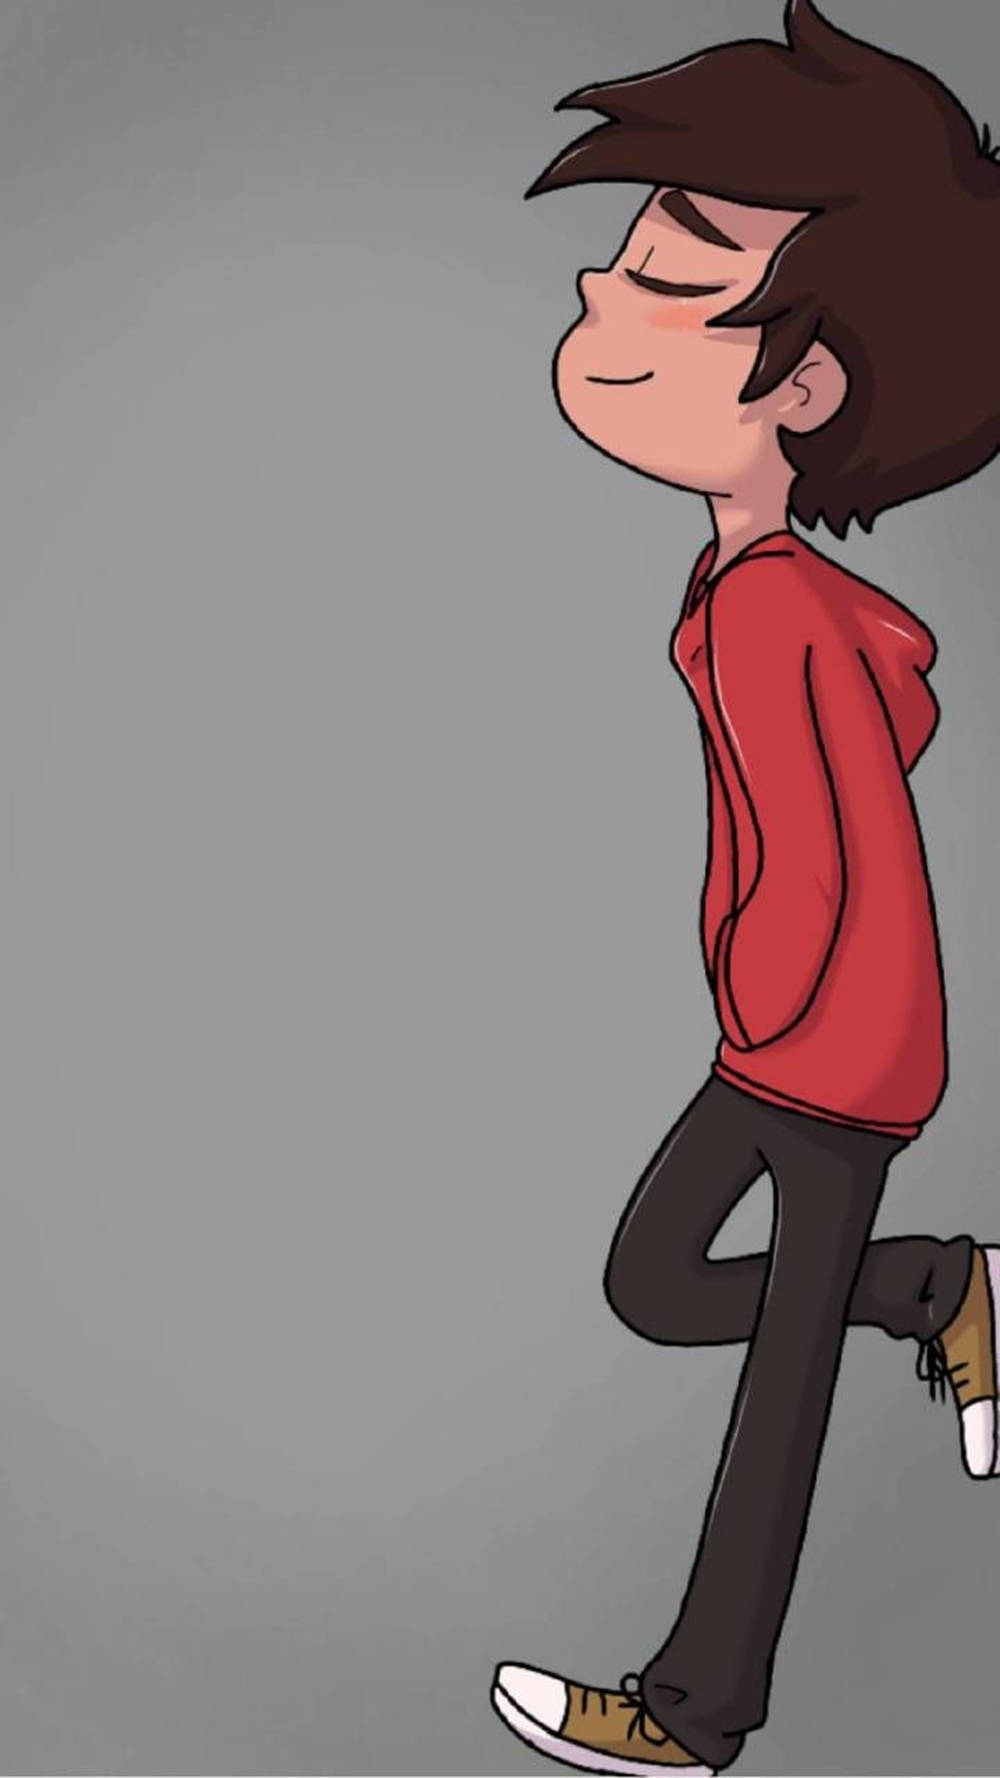 Caption: Cool Marco, The Cute Boy Cartoon Leaning On A Wall